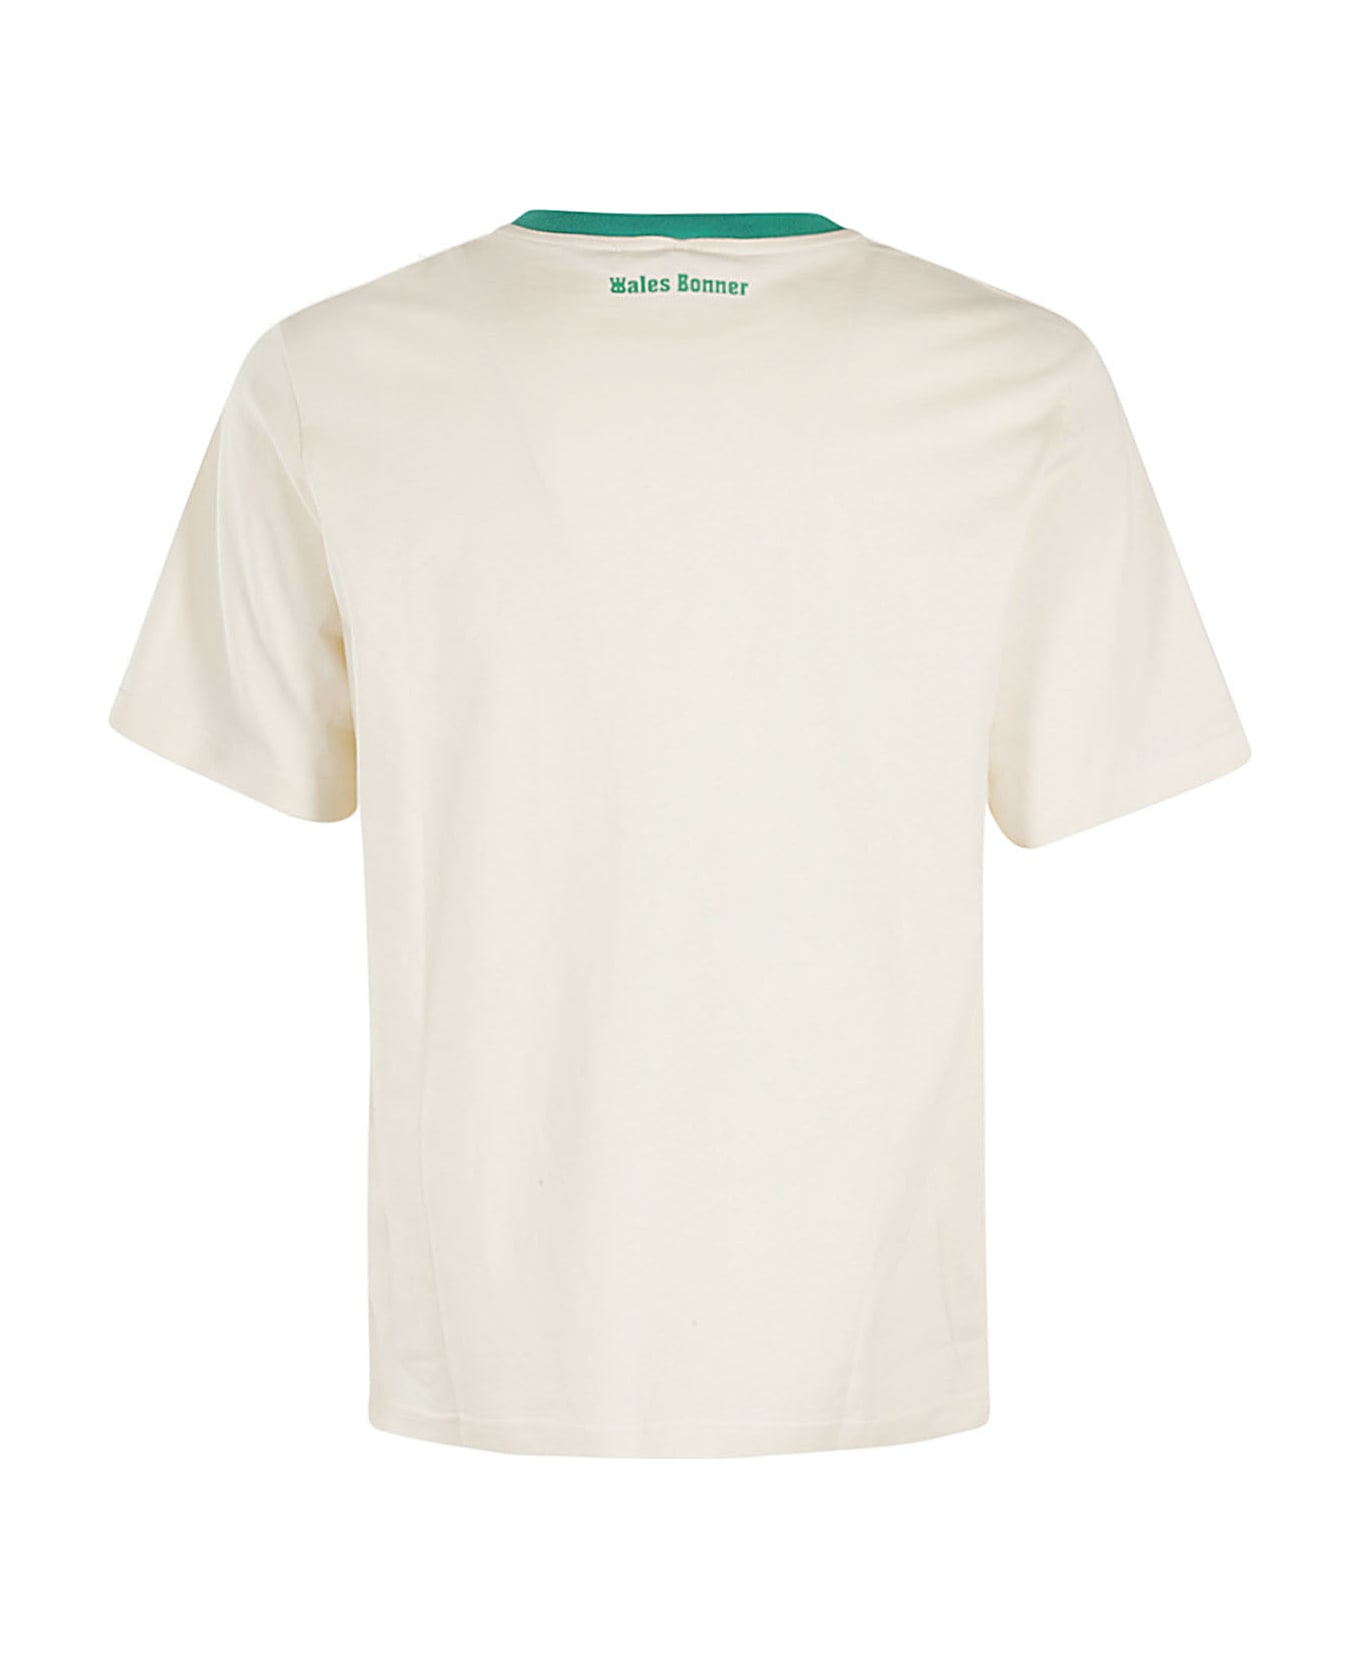 Wales Bonner Resilience T Shirt - Ivory